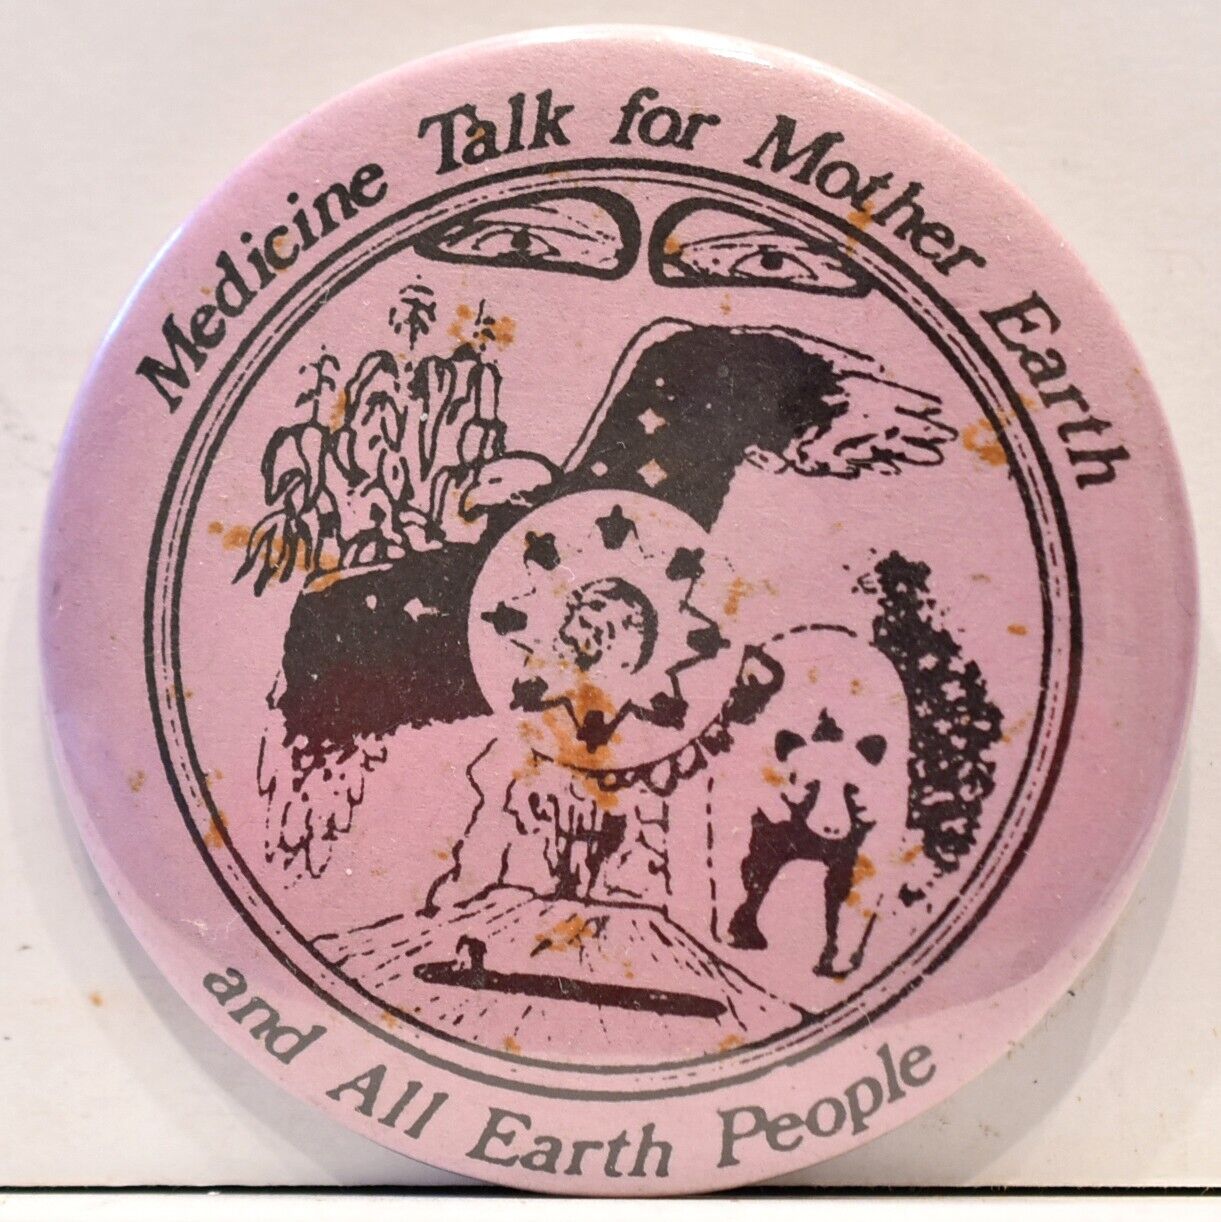 1981 Medicine Talk for Mother Earth And All People Climate Change Greenpeace Pin